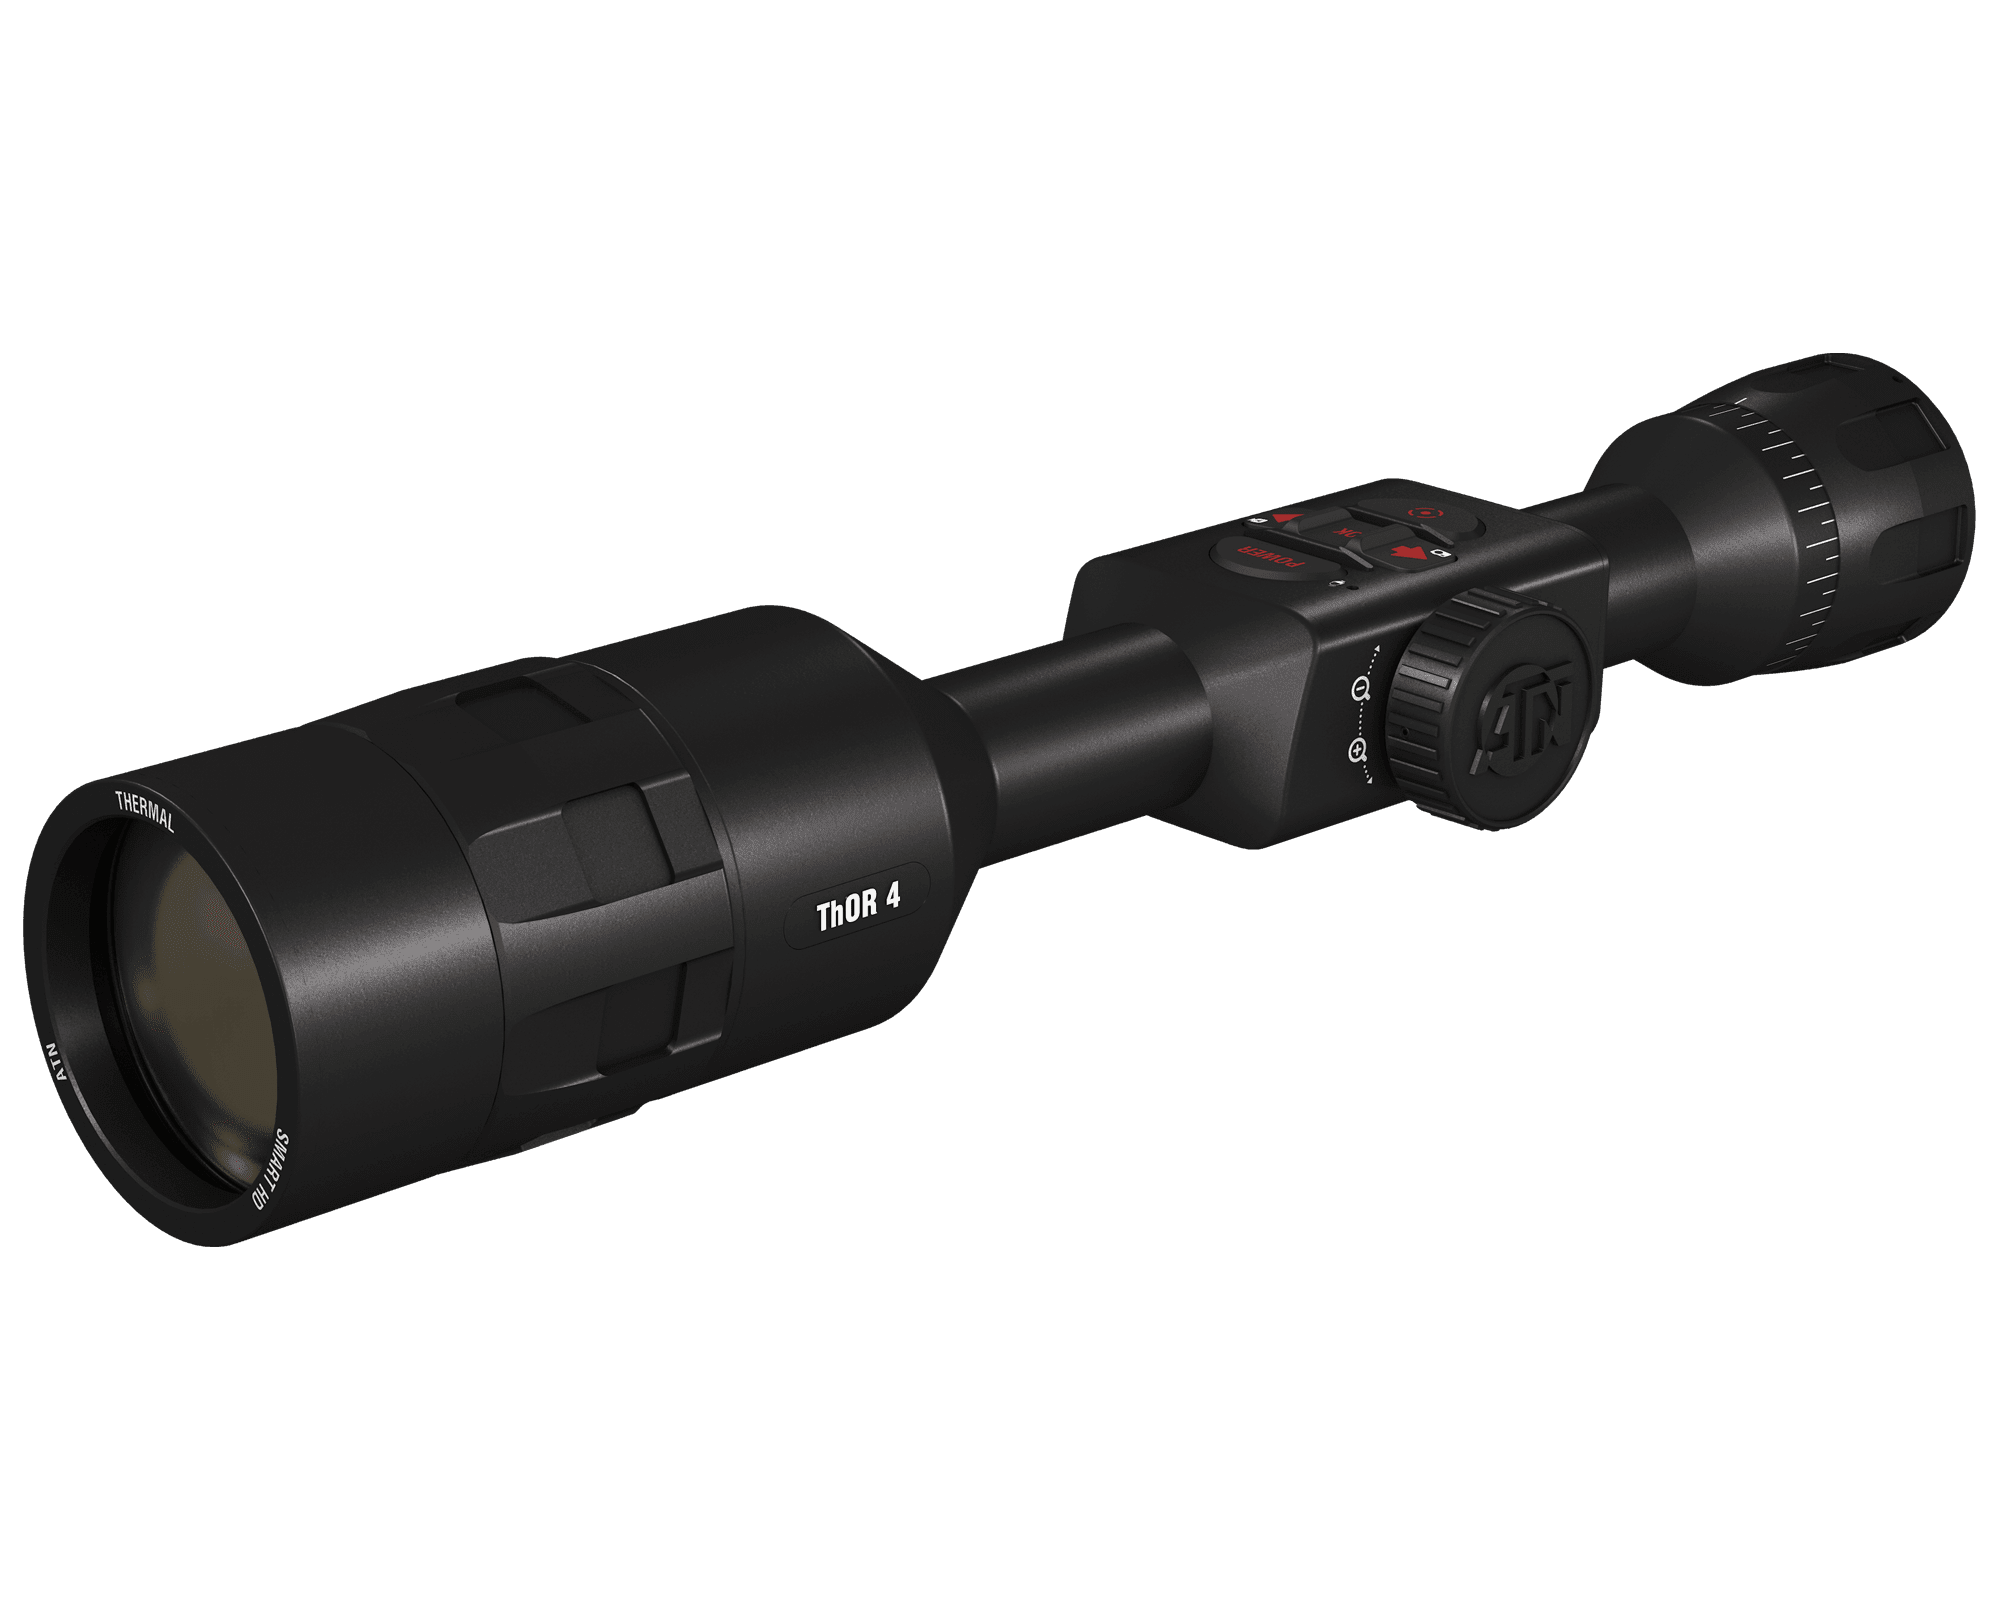 Thermal Rifle Scope w/Ultra Sensitive Next Gen Sensor Range Finder 640x480 ATN Thor 4 WiFi Ballistic Calculator and iOS and Android Apps Image Stabilization 